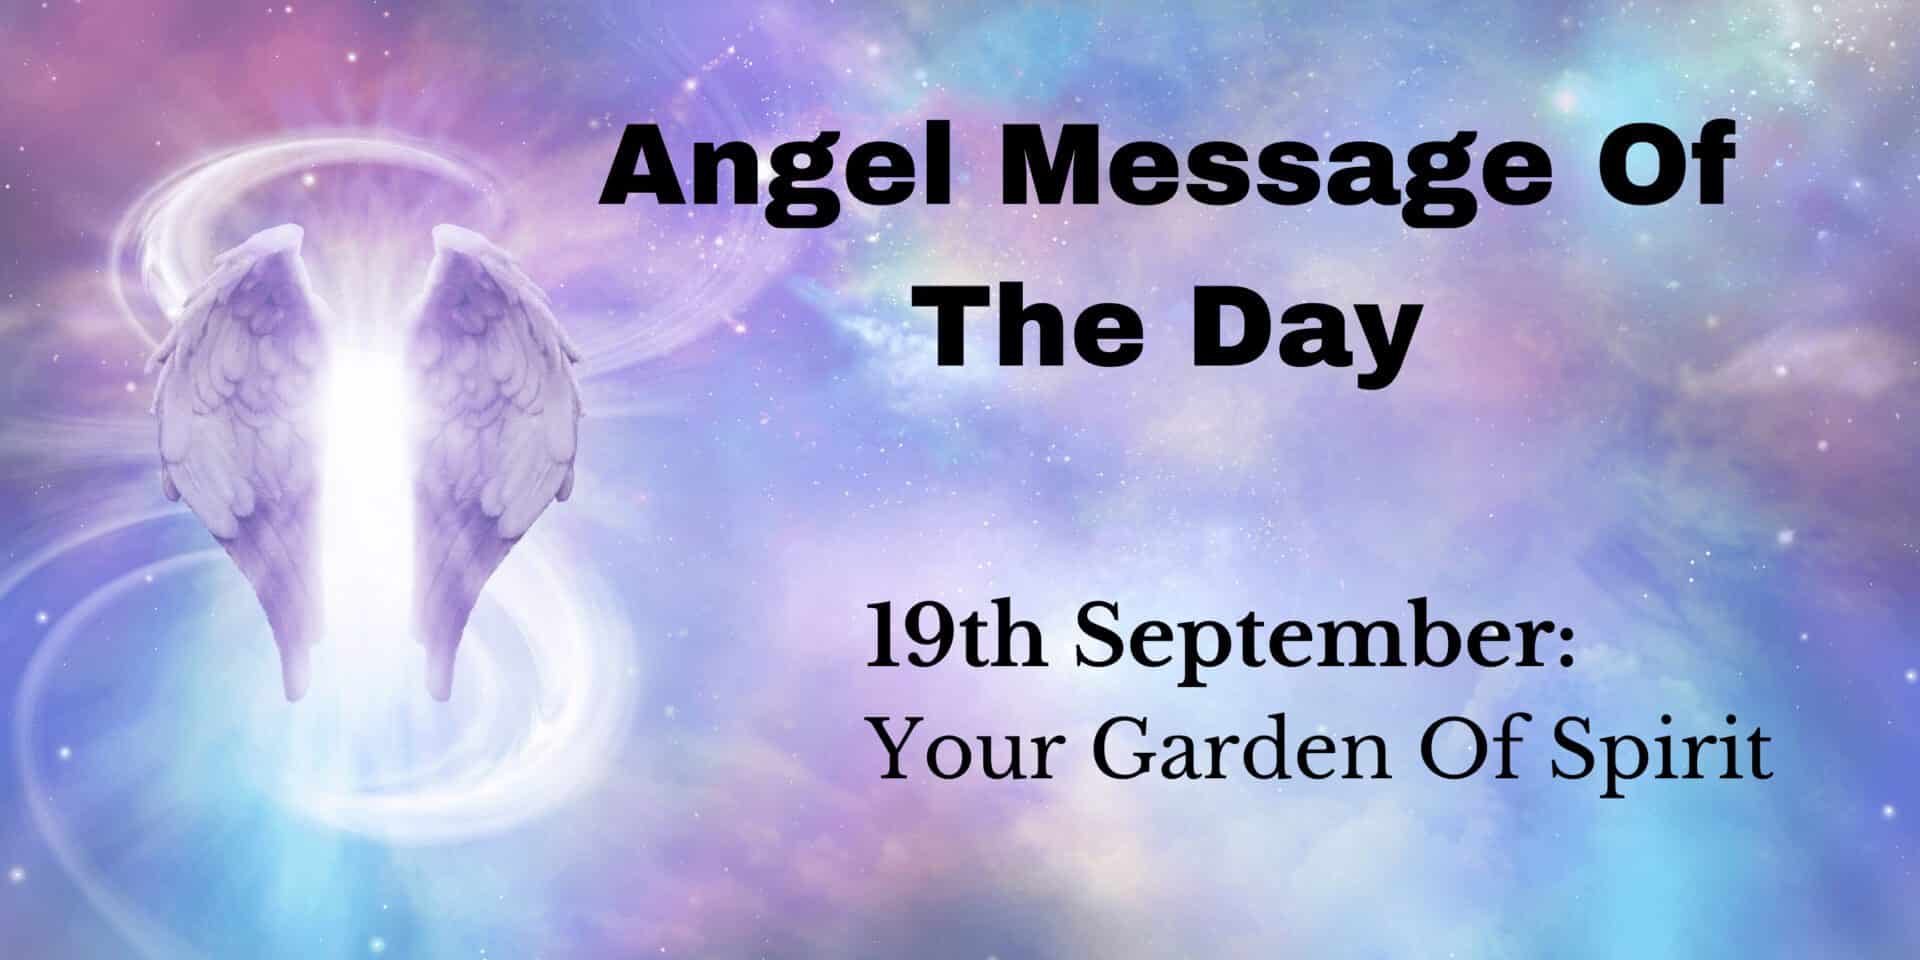 angel message of the day : your garden of spirit